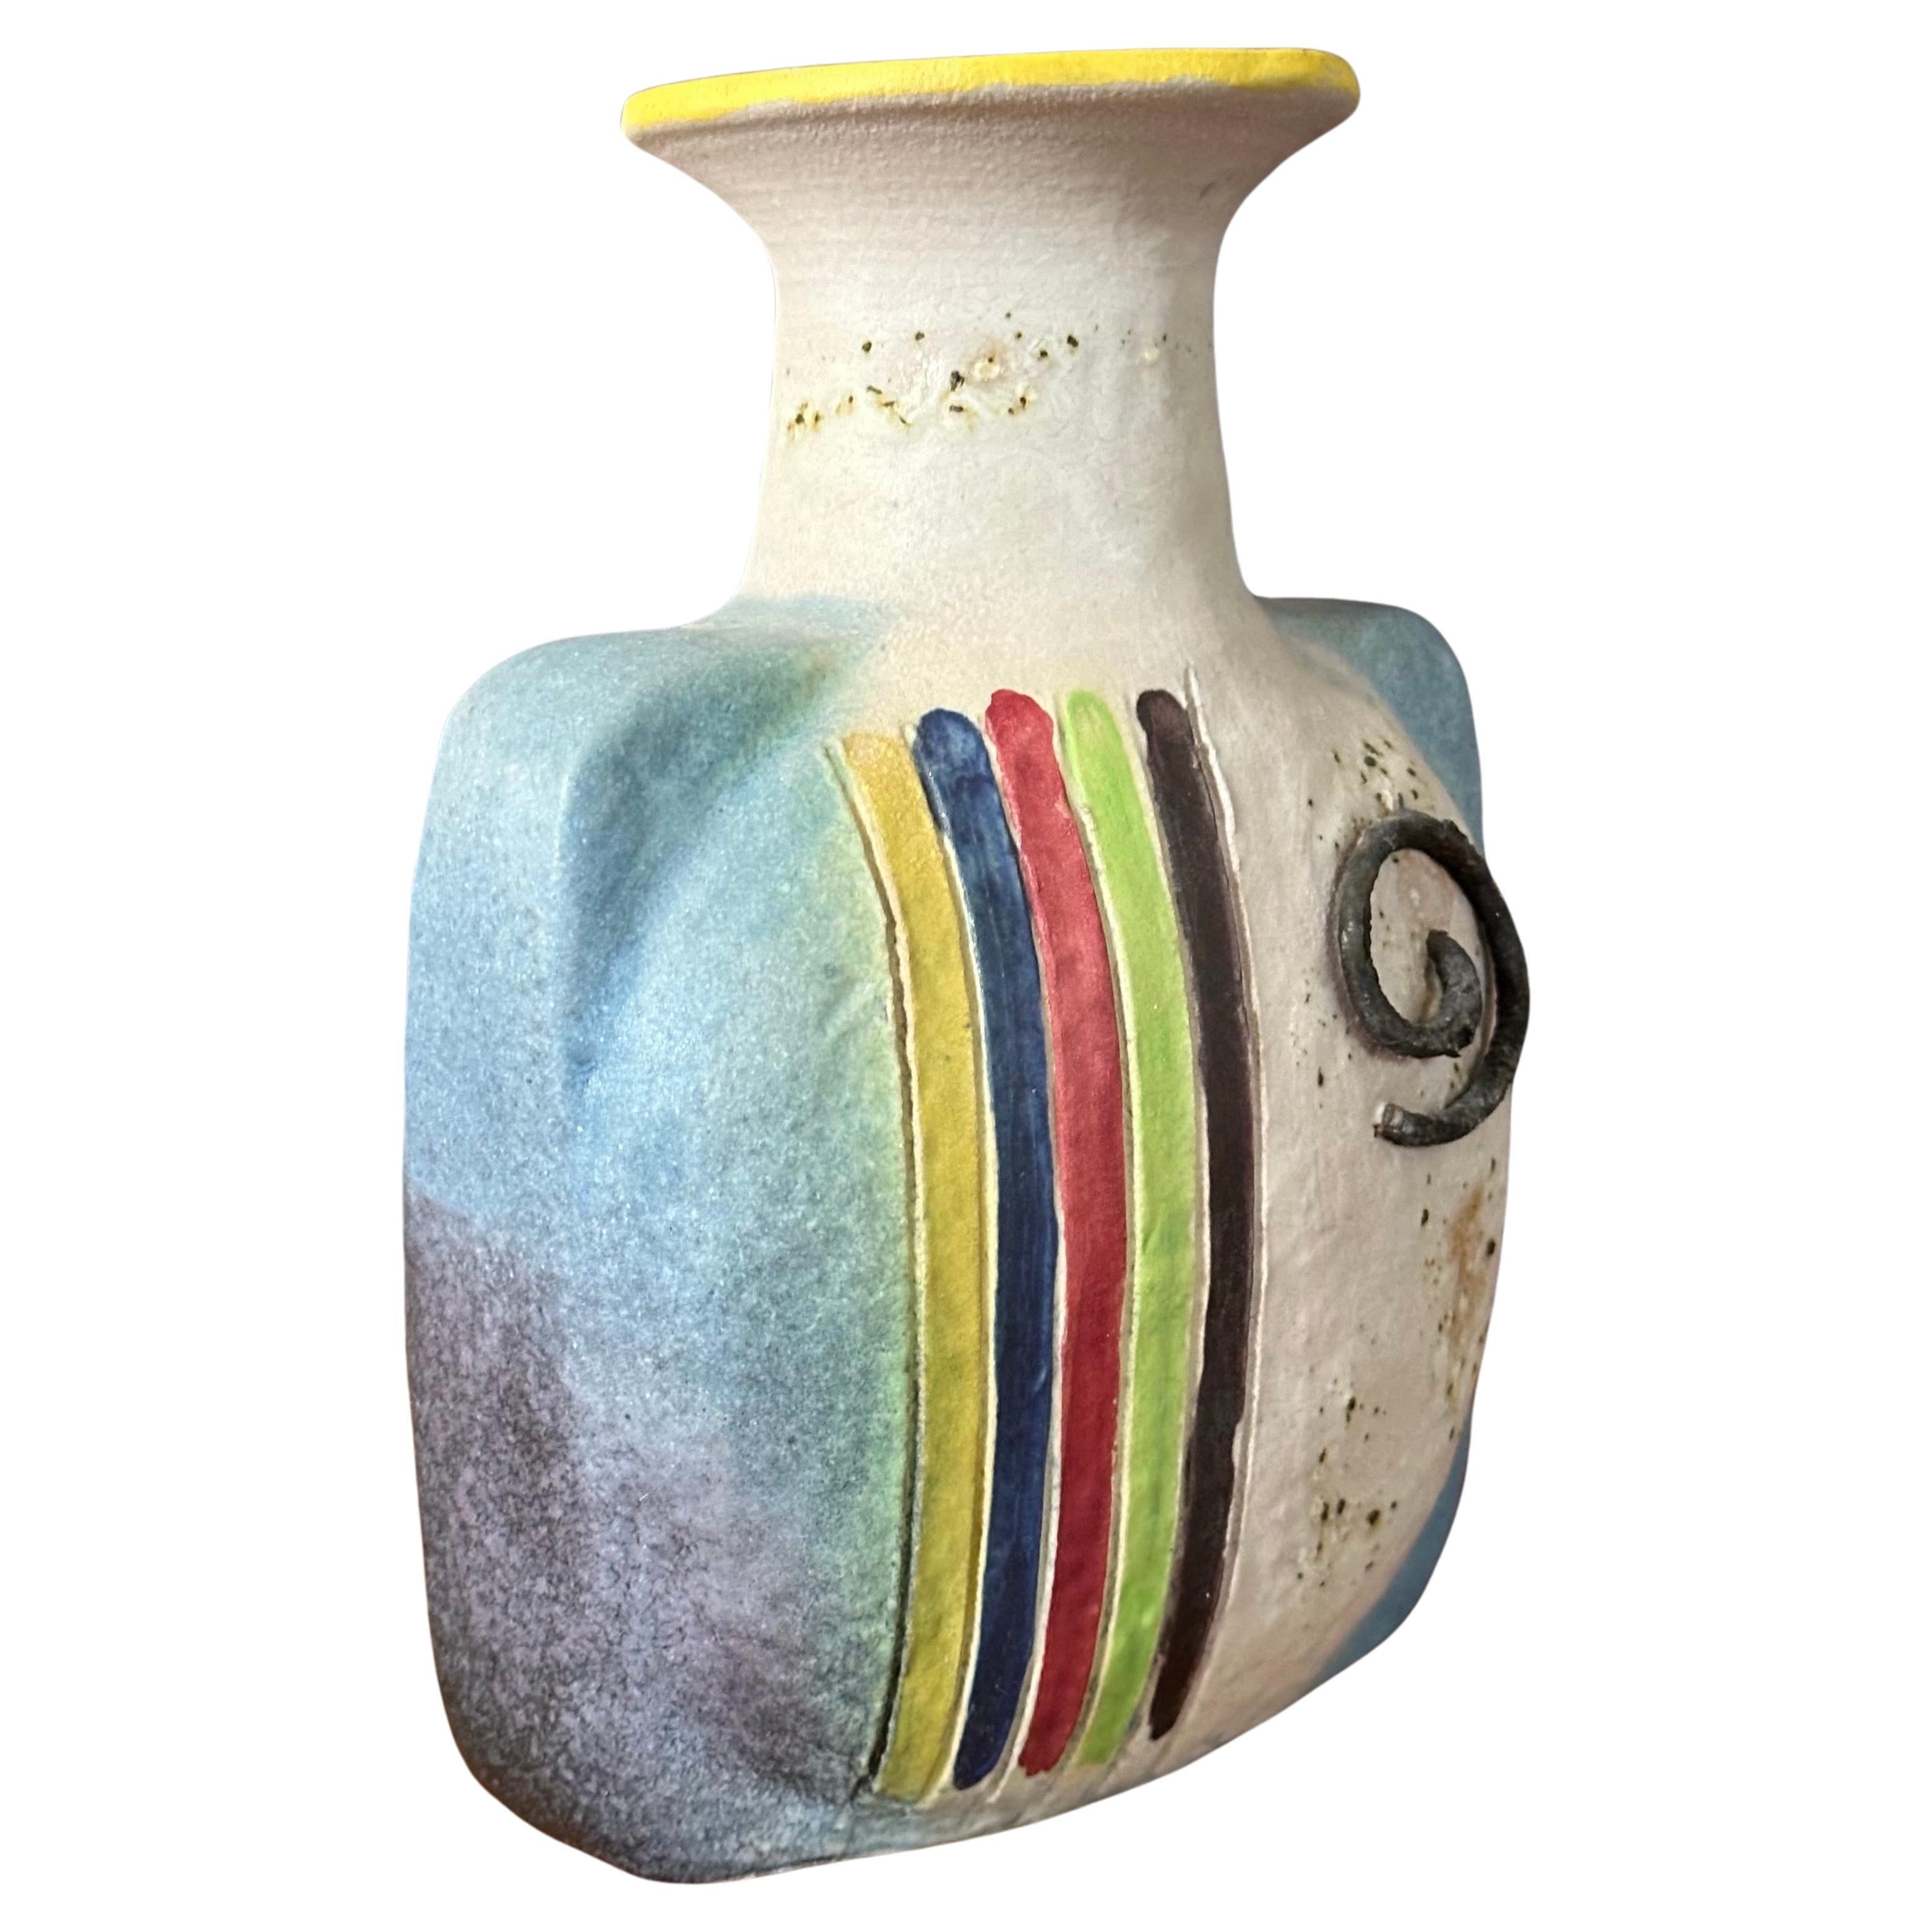 A vibrant MCM Italian ceramic vase by Ivo de Santis for Gli Etruschi, circa 1960s.  The vase features colorful stripes and a spiral accent. Signed on the underside.  The hand thrown vase is in great vintage condition with no chips or cracks and it